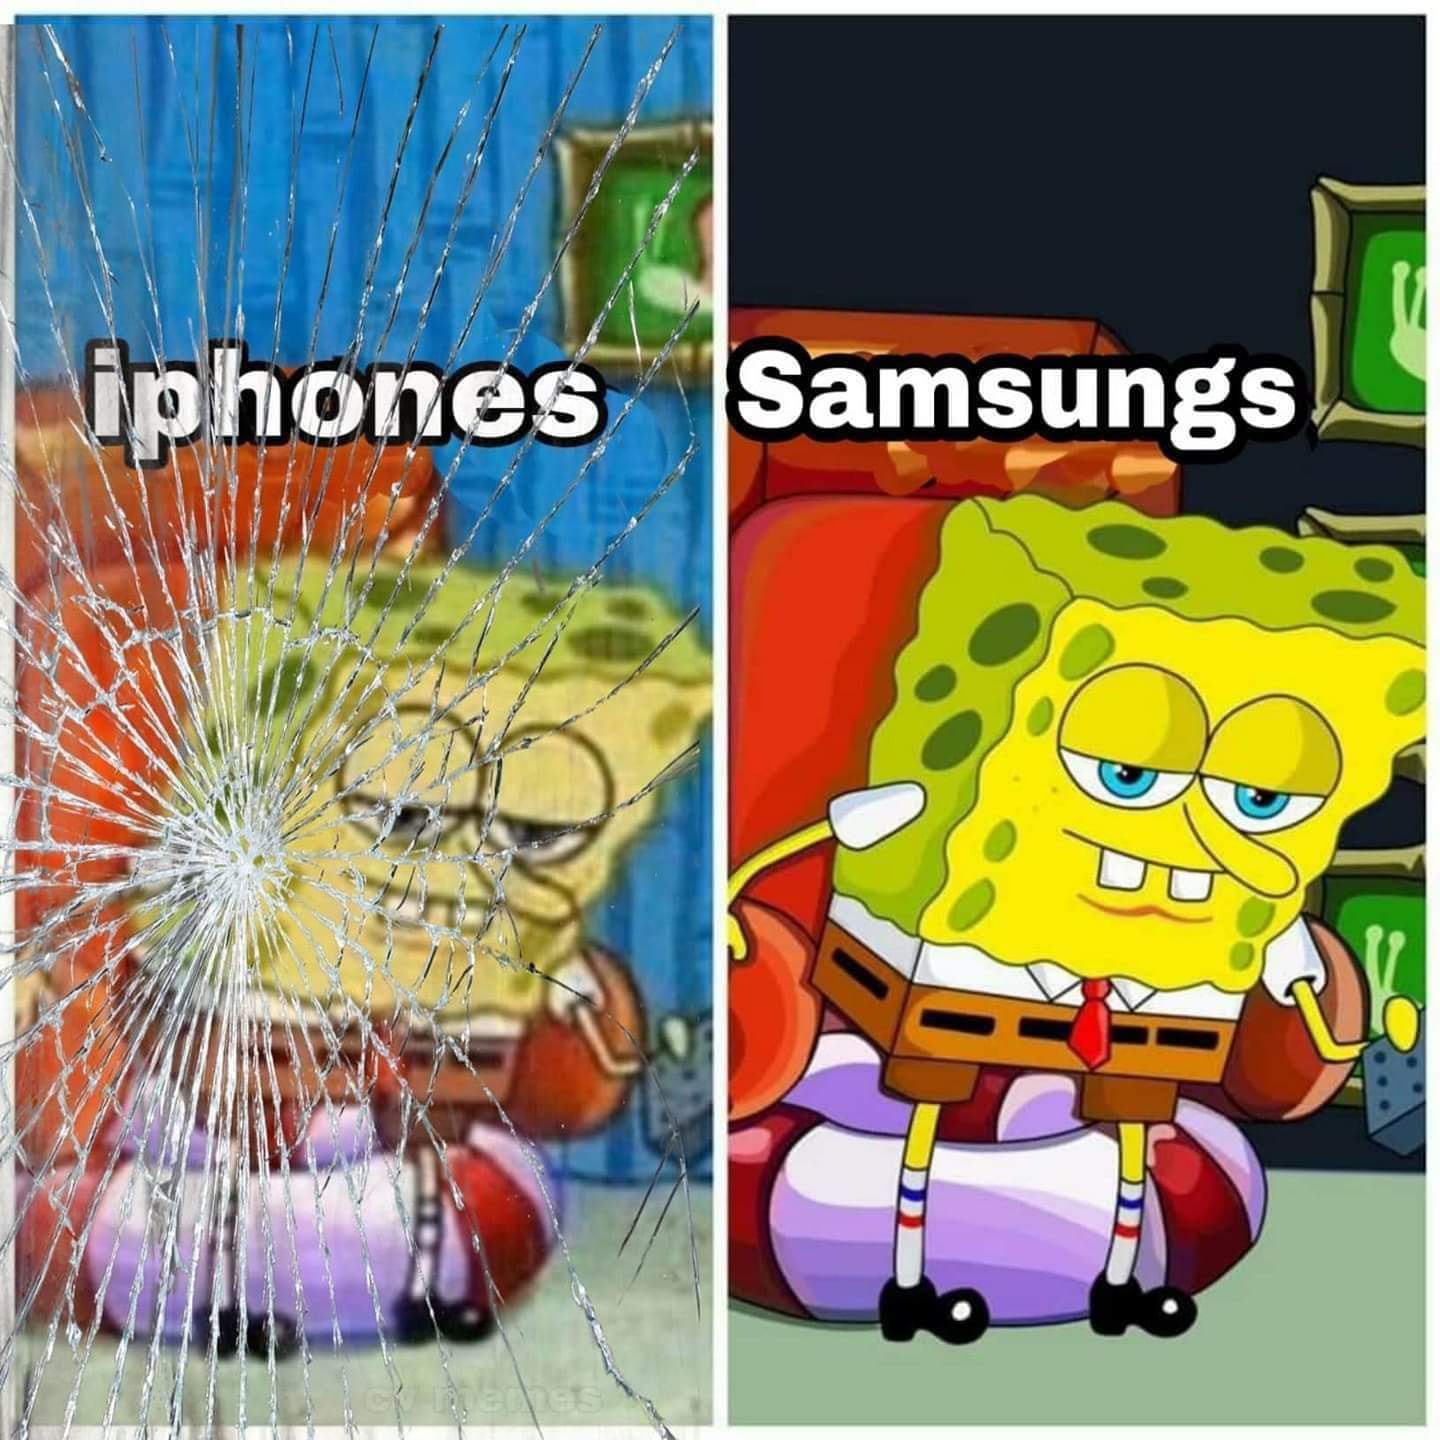 Android phones are the only ones that lasts! - meme